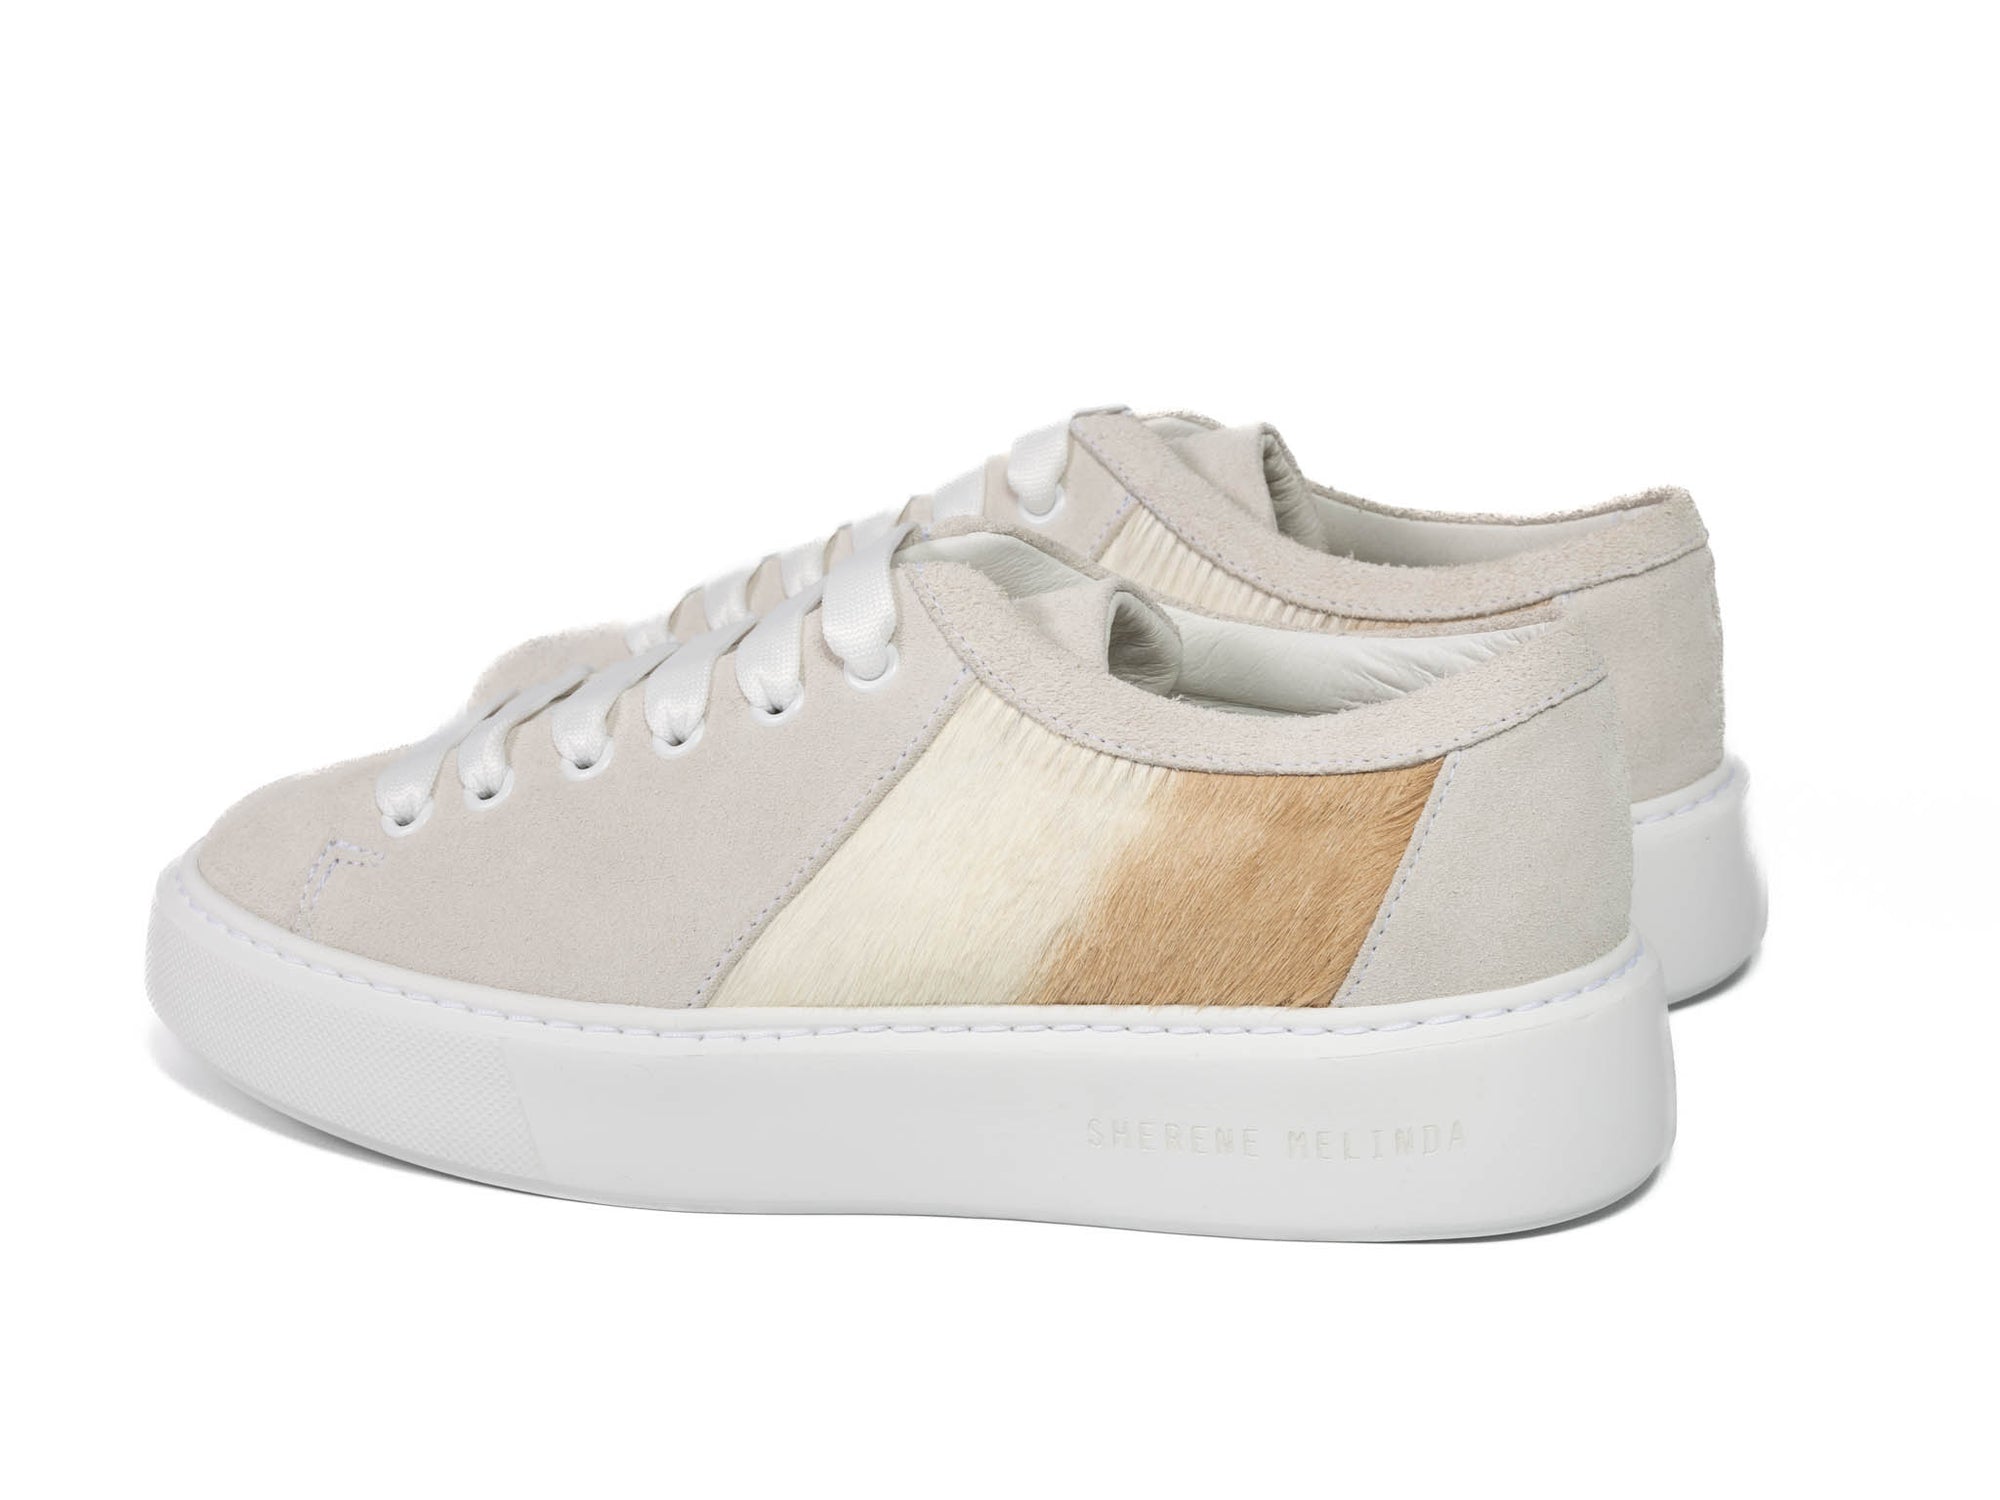 Beige Stripe Hair-on-hide Trainer Model 001 in White Suede Leather